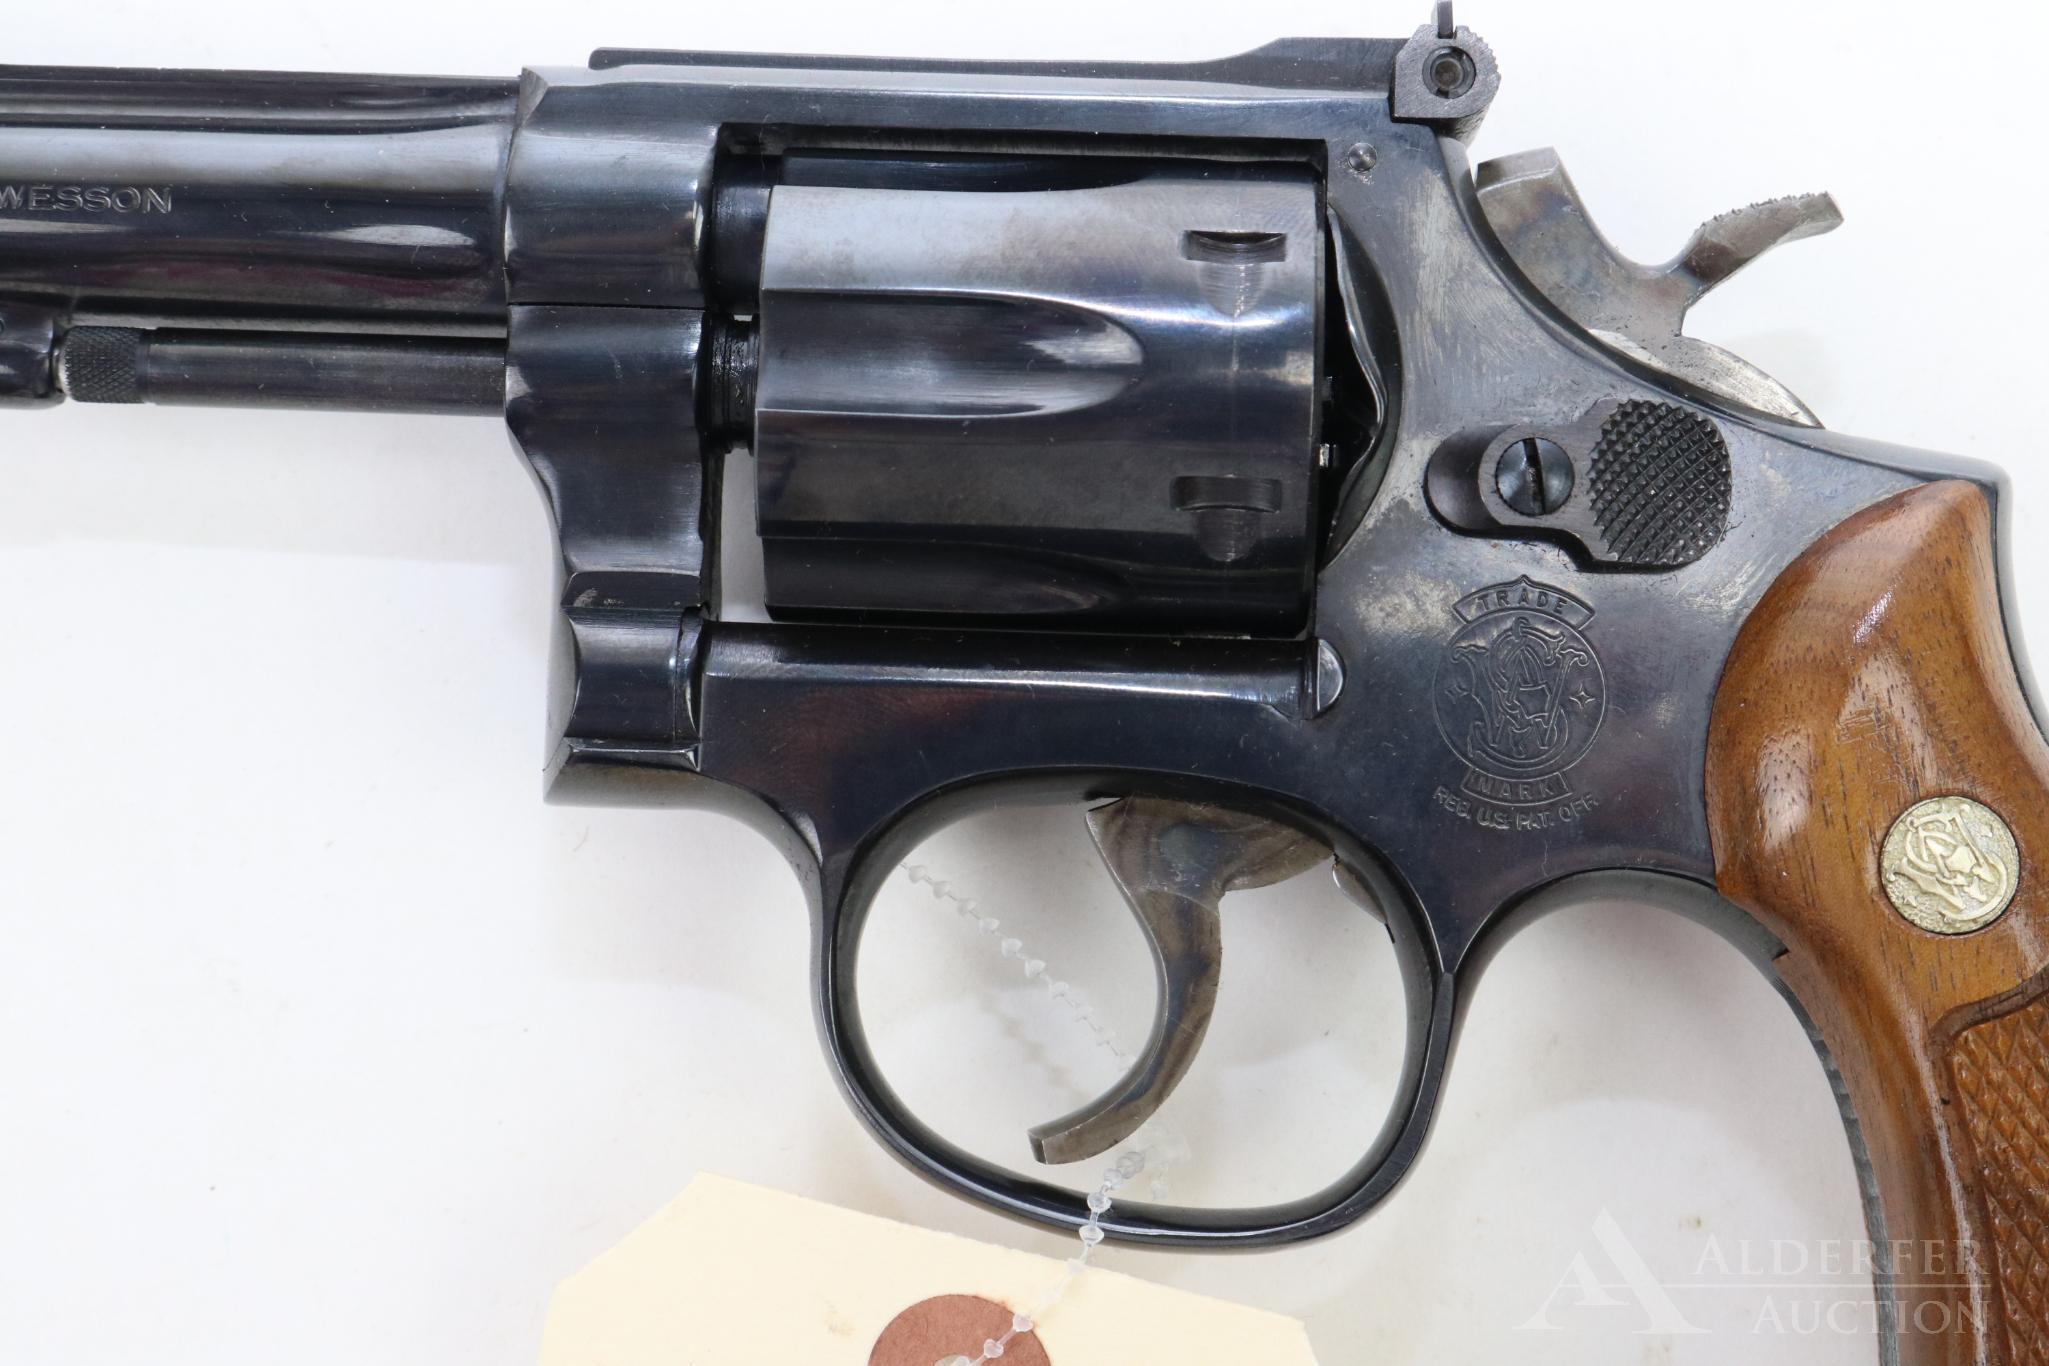 Smith & Wesson 48-4 double action revolver.